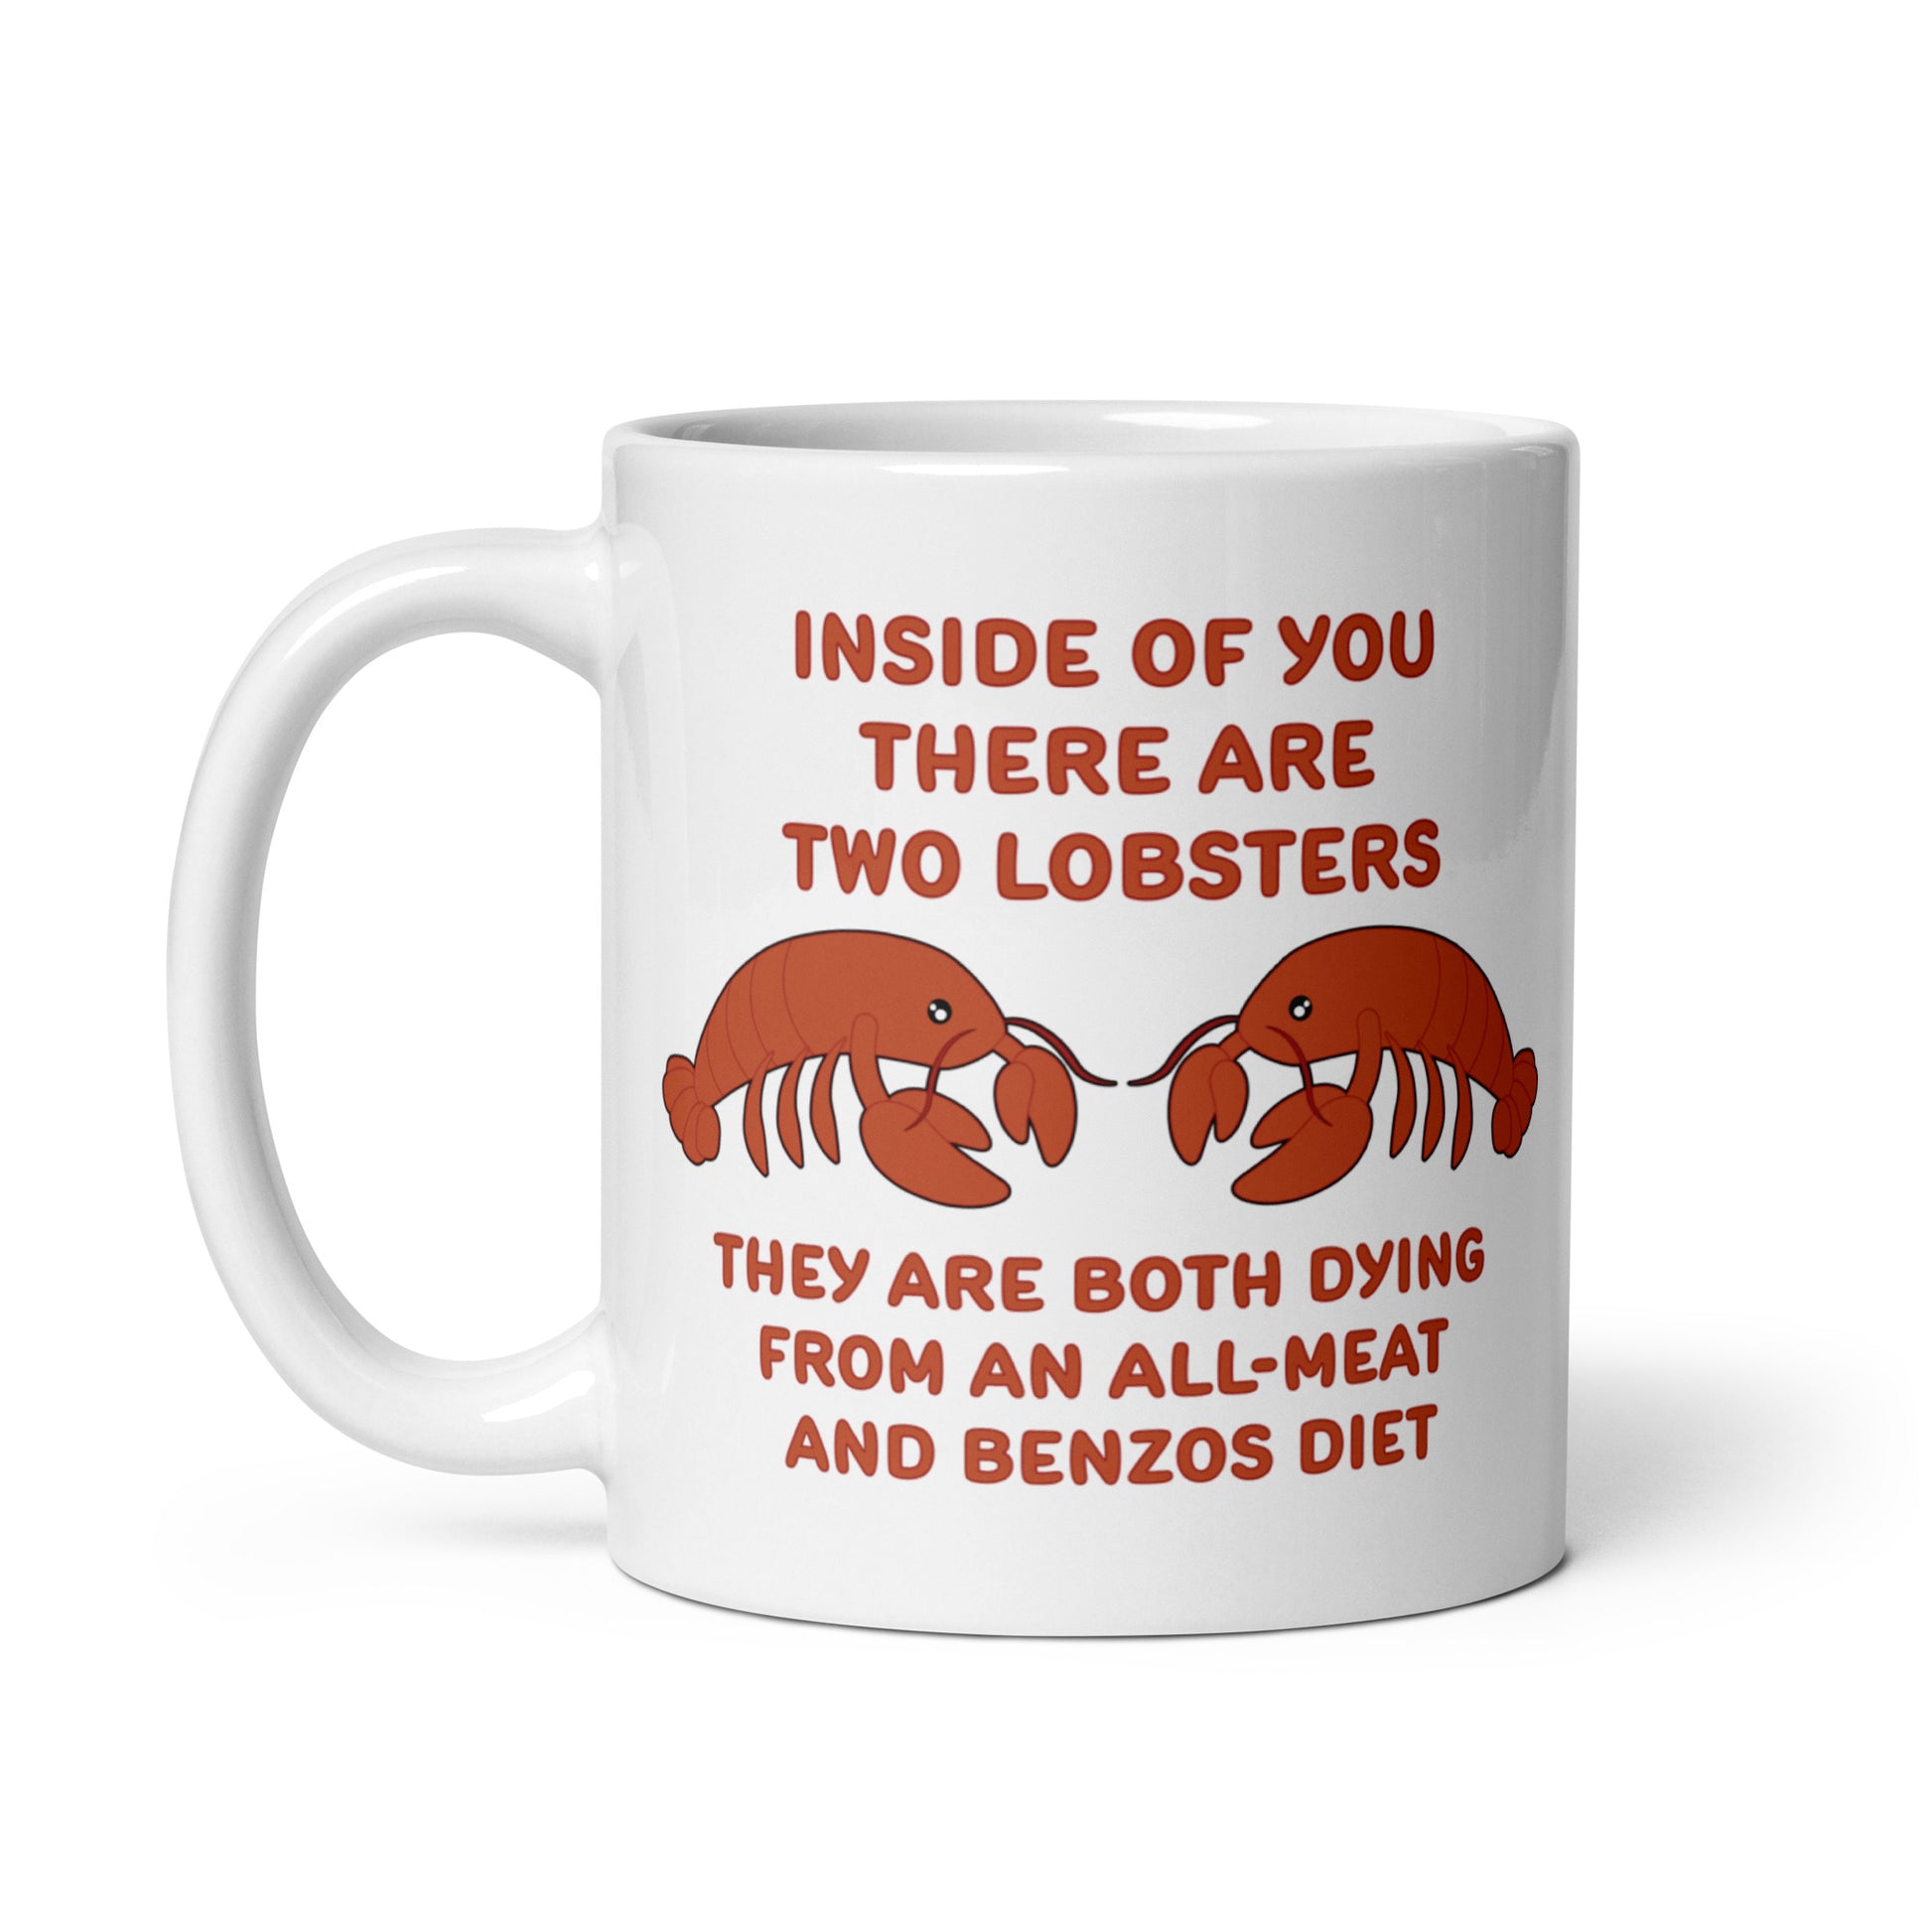 A white 11 ounce ceramic mug featuring an illustration of two lobsters. Text around the lobsters reads "Inside of you there are two lobsters." "They are both dying from an all-meat and benzos diet."